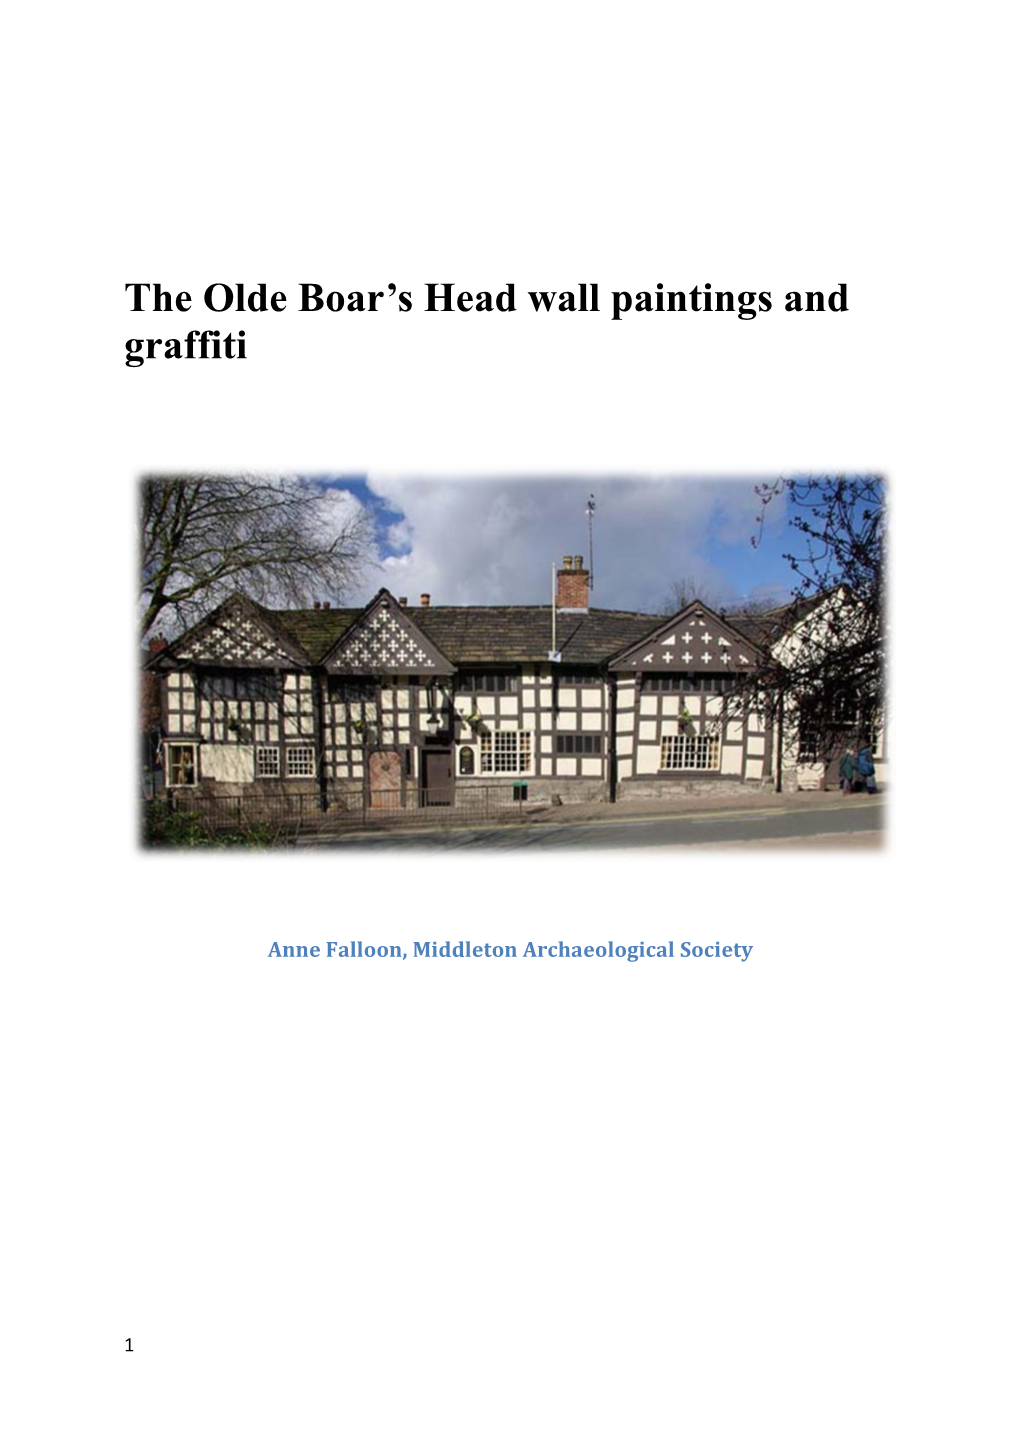 The Olde Boar's Head Wall Paintings and Graffiti